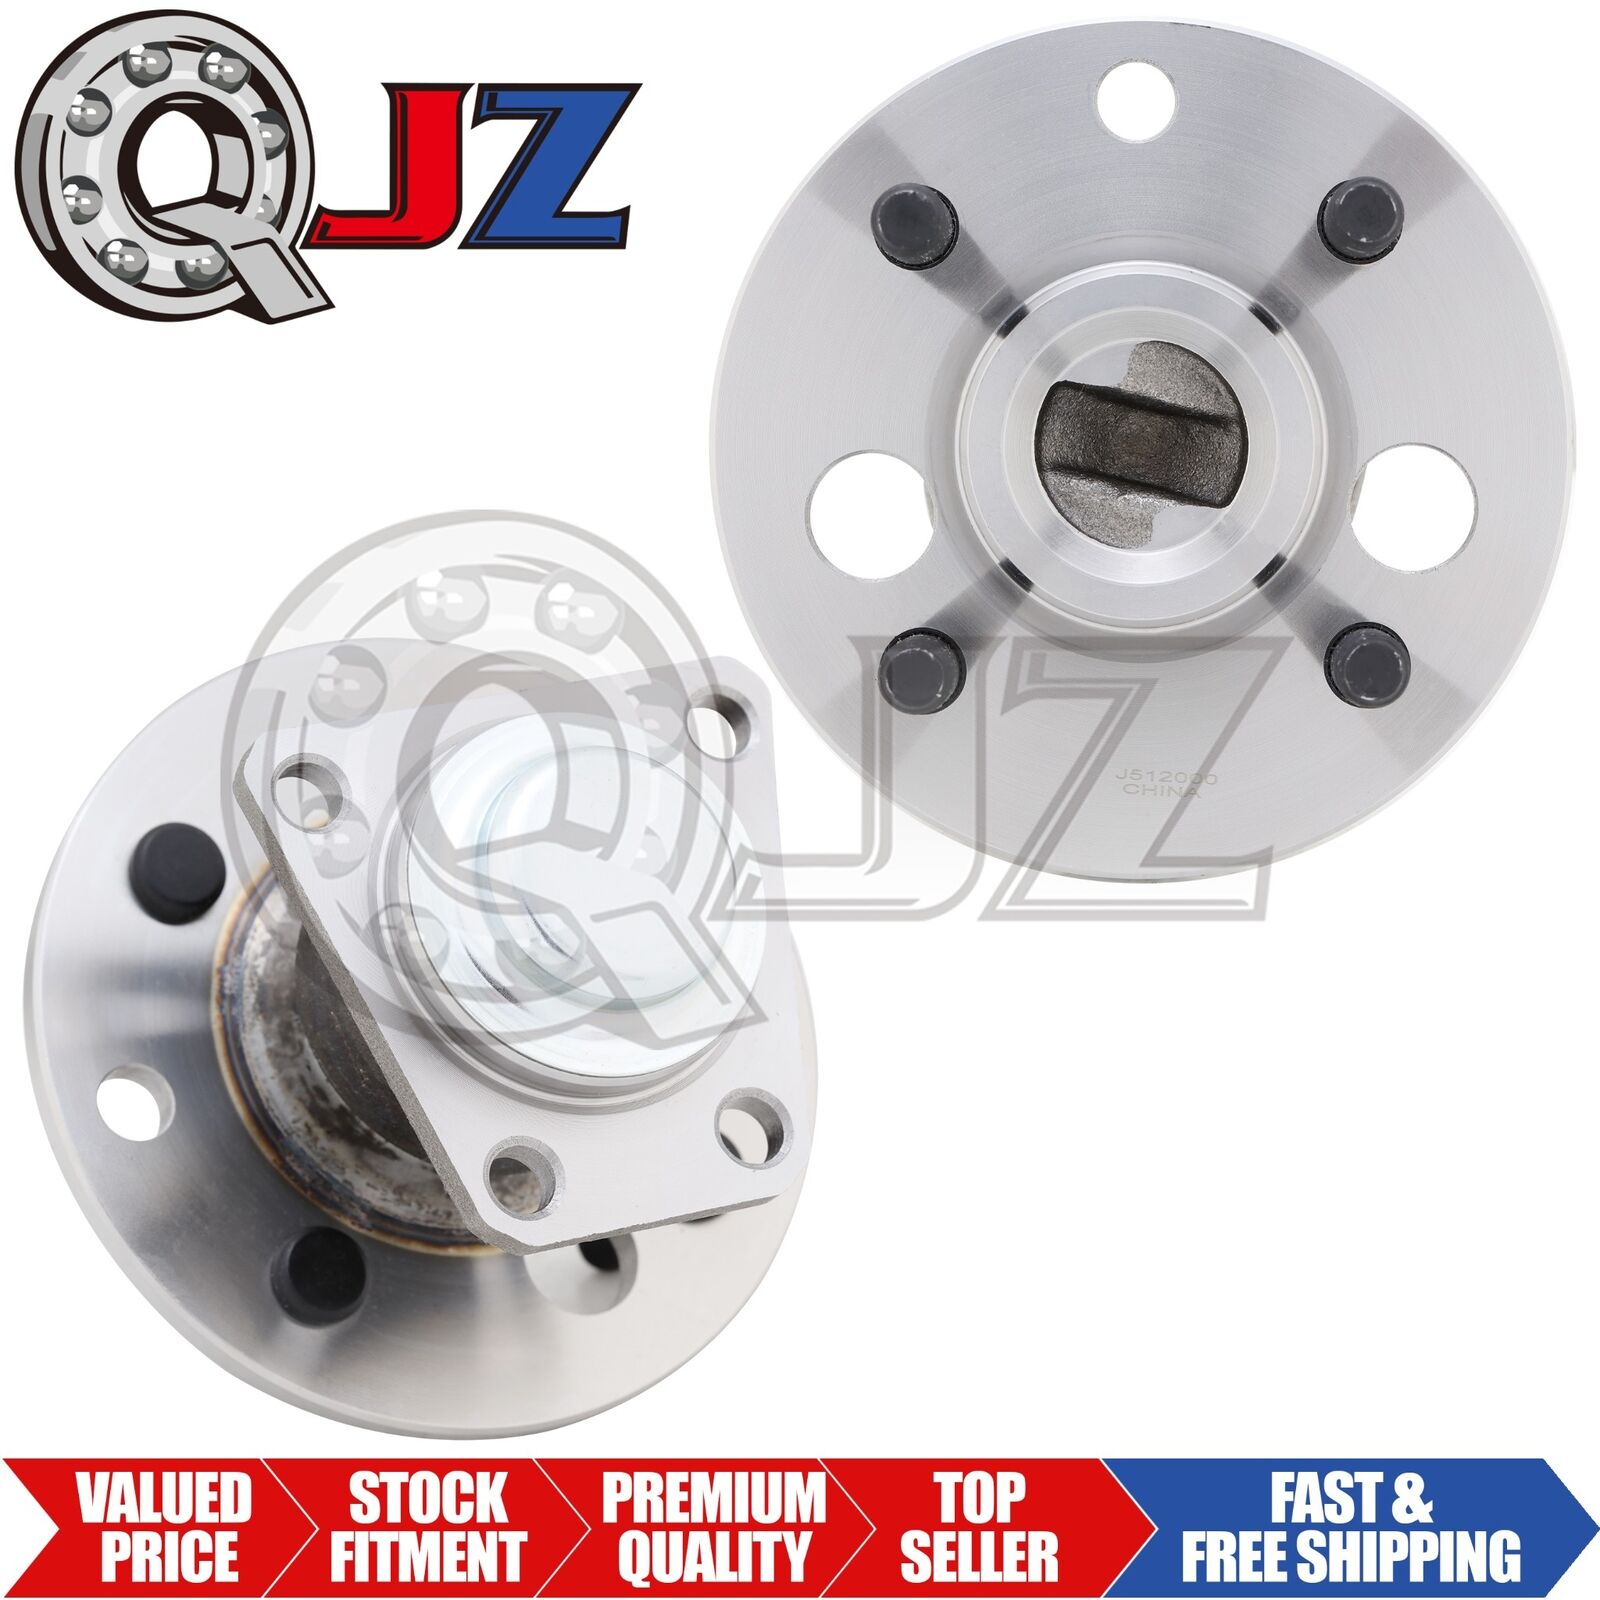 [2-Pack] 512000 REAR Wheel Hub Assembly for 1993-1999 Saturn SW1 Wagon 1.9L FWD